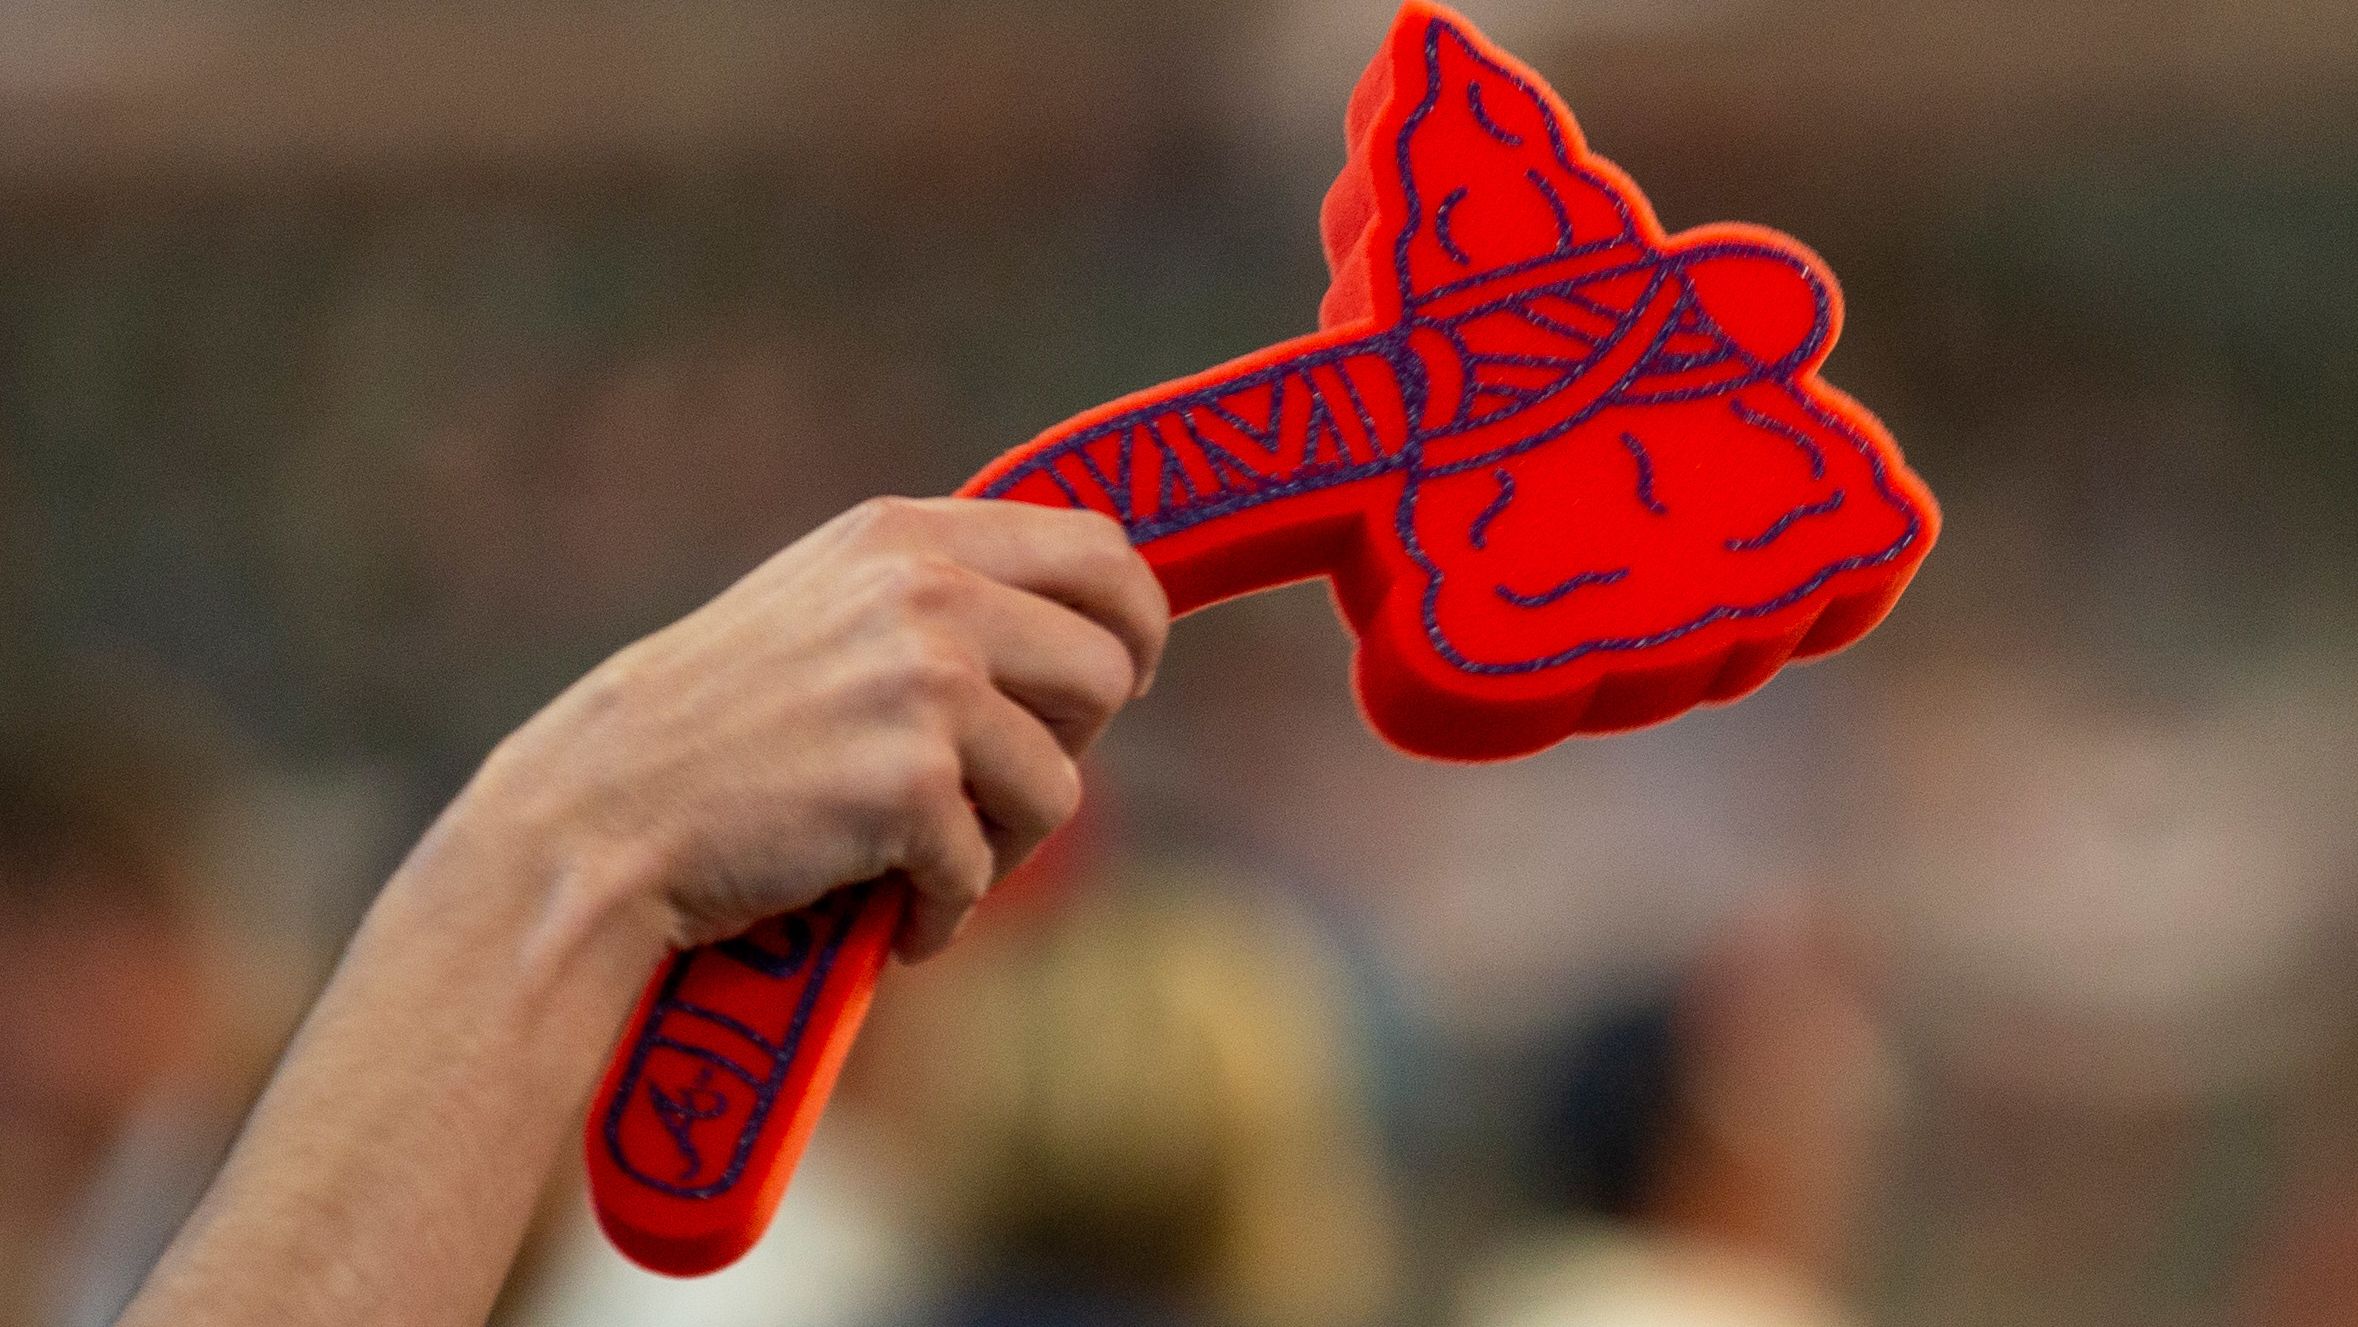 A fan holds a foam tomahawk during Game Five of the National League Division Series between the Atlanta Braves and the St. Louis Cardinals at SunTrust Park on October 9, 2019 in Atlanta.